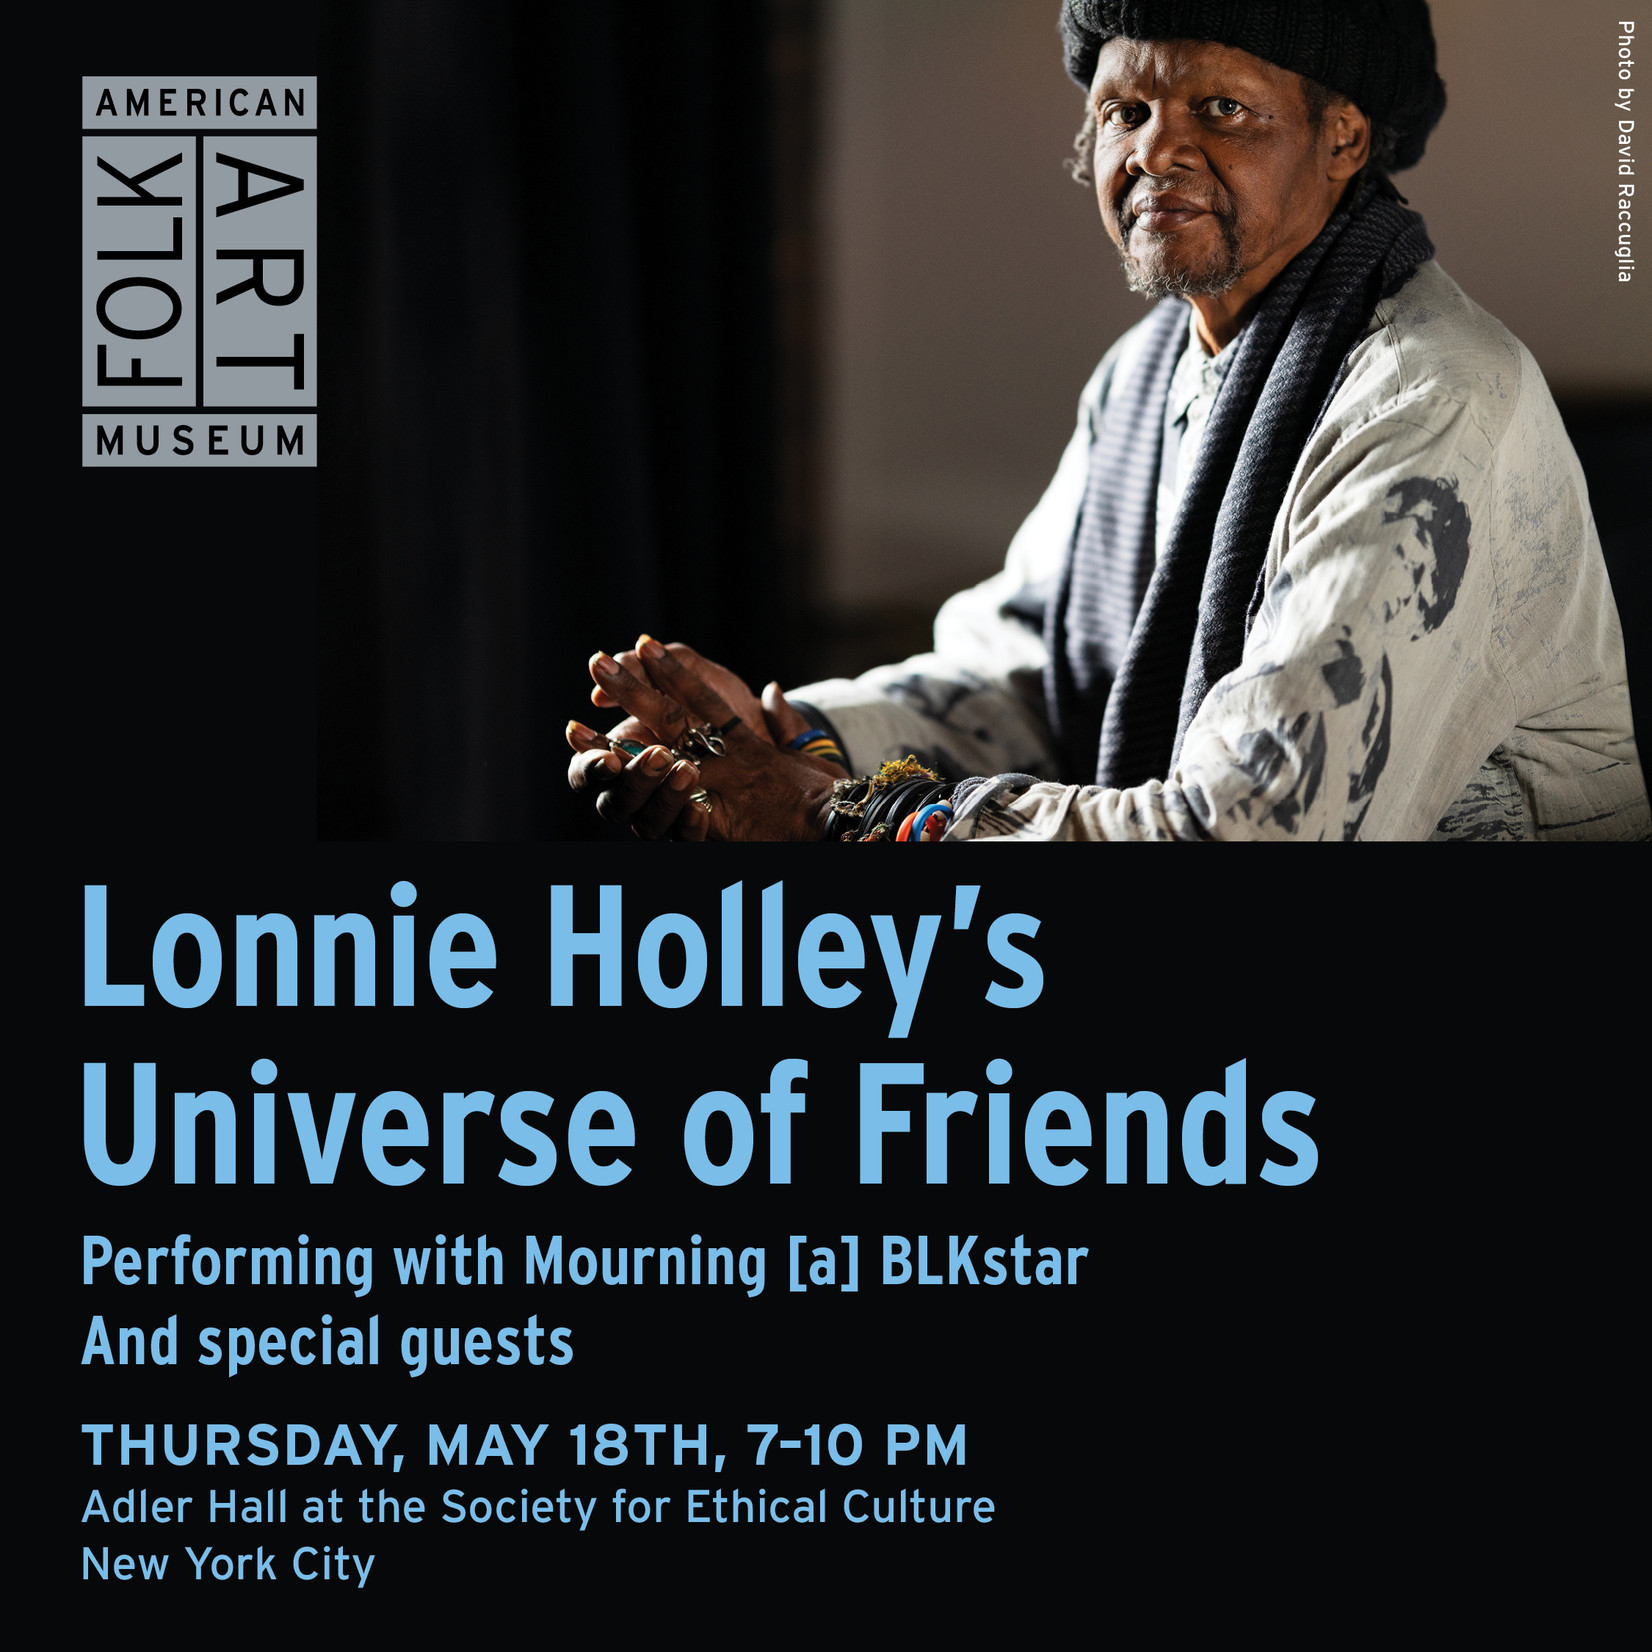 Donate to the Lonnie Holley Benefit Concert